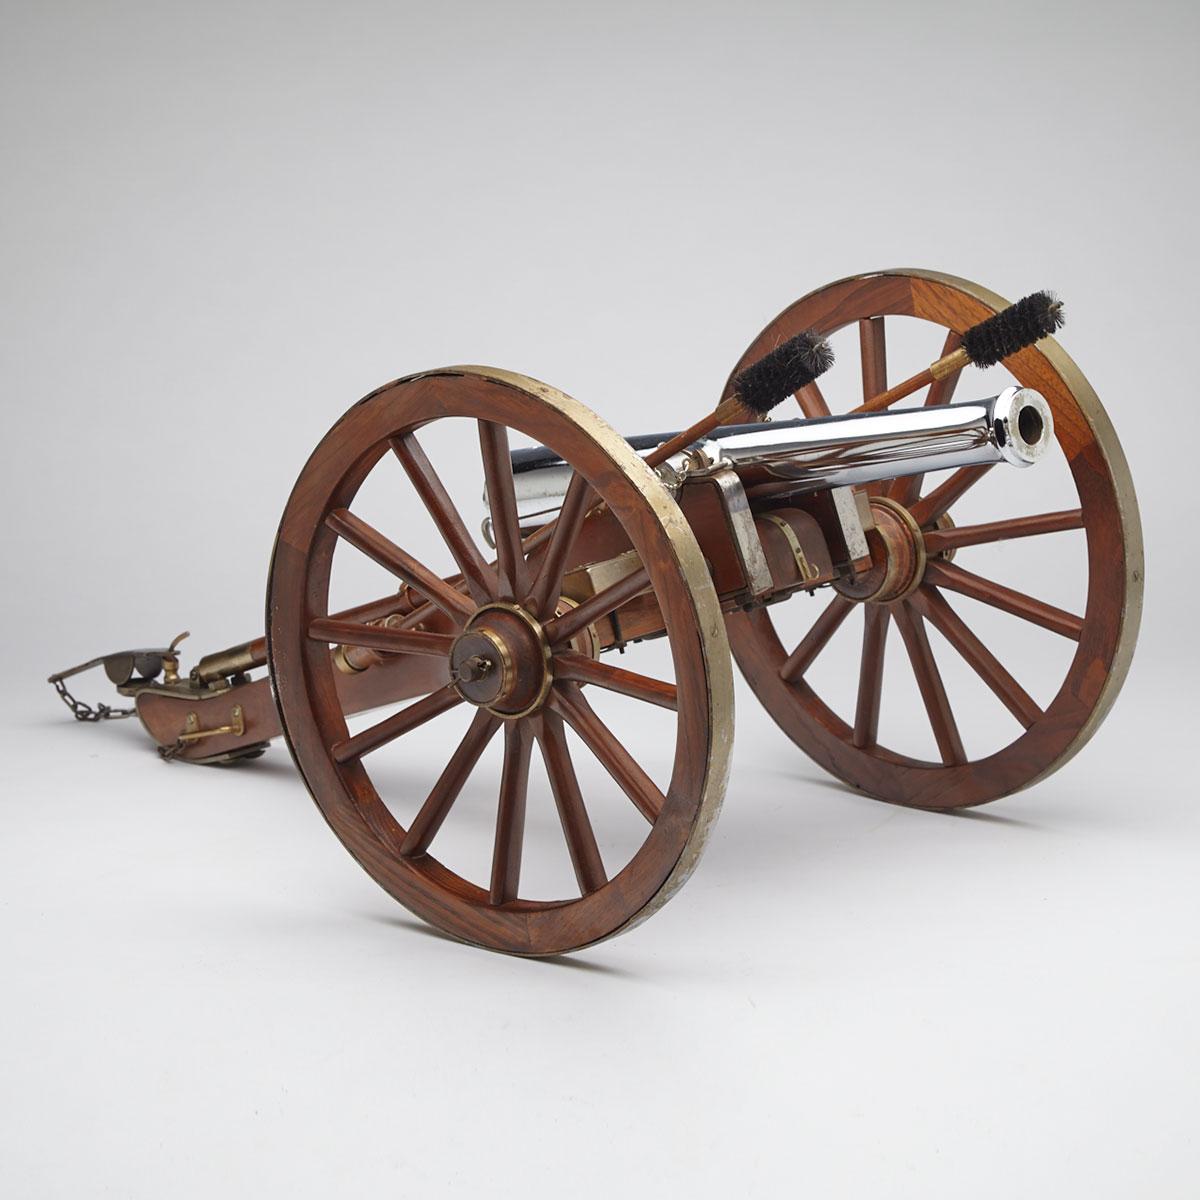 Spanish Model of a Napoleon III Field Cannon and Carriage, mid 20th century